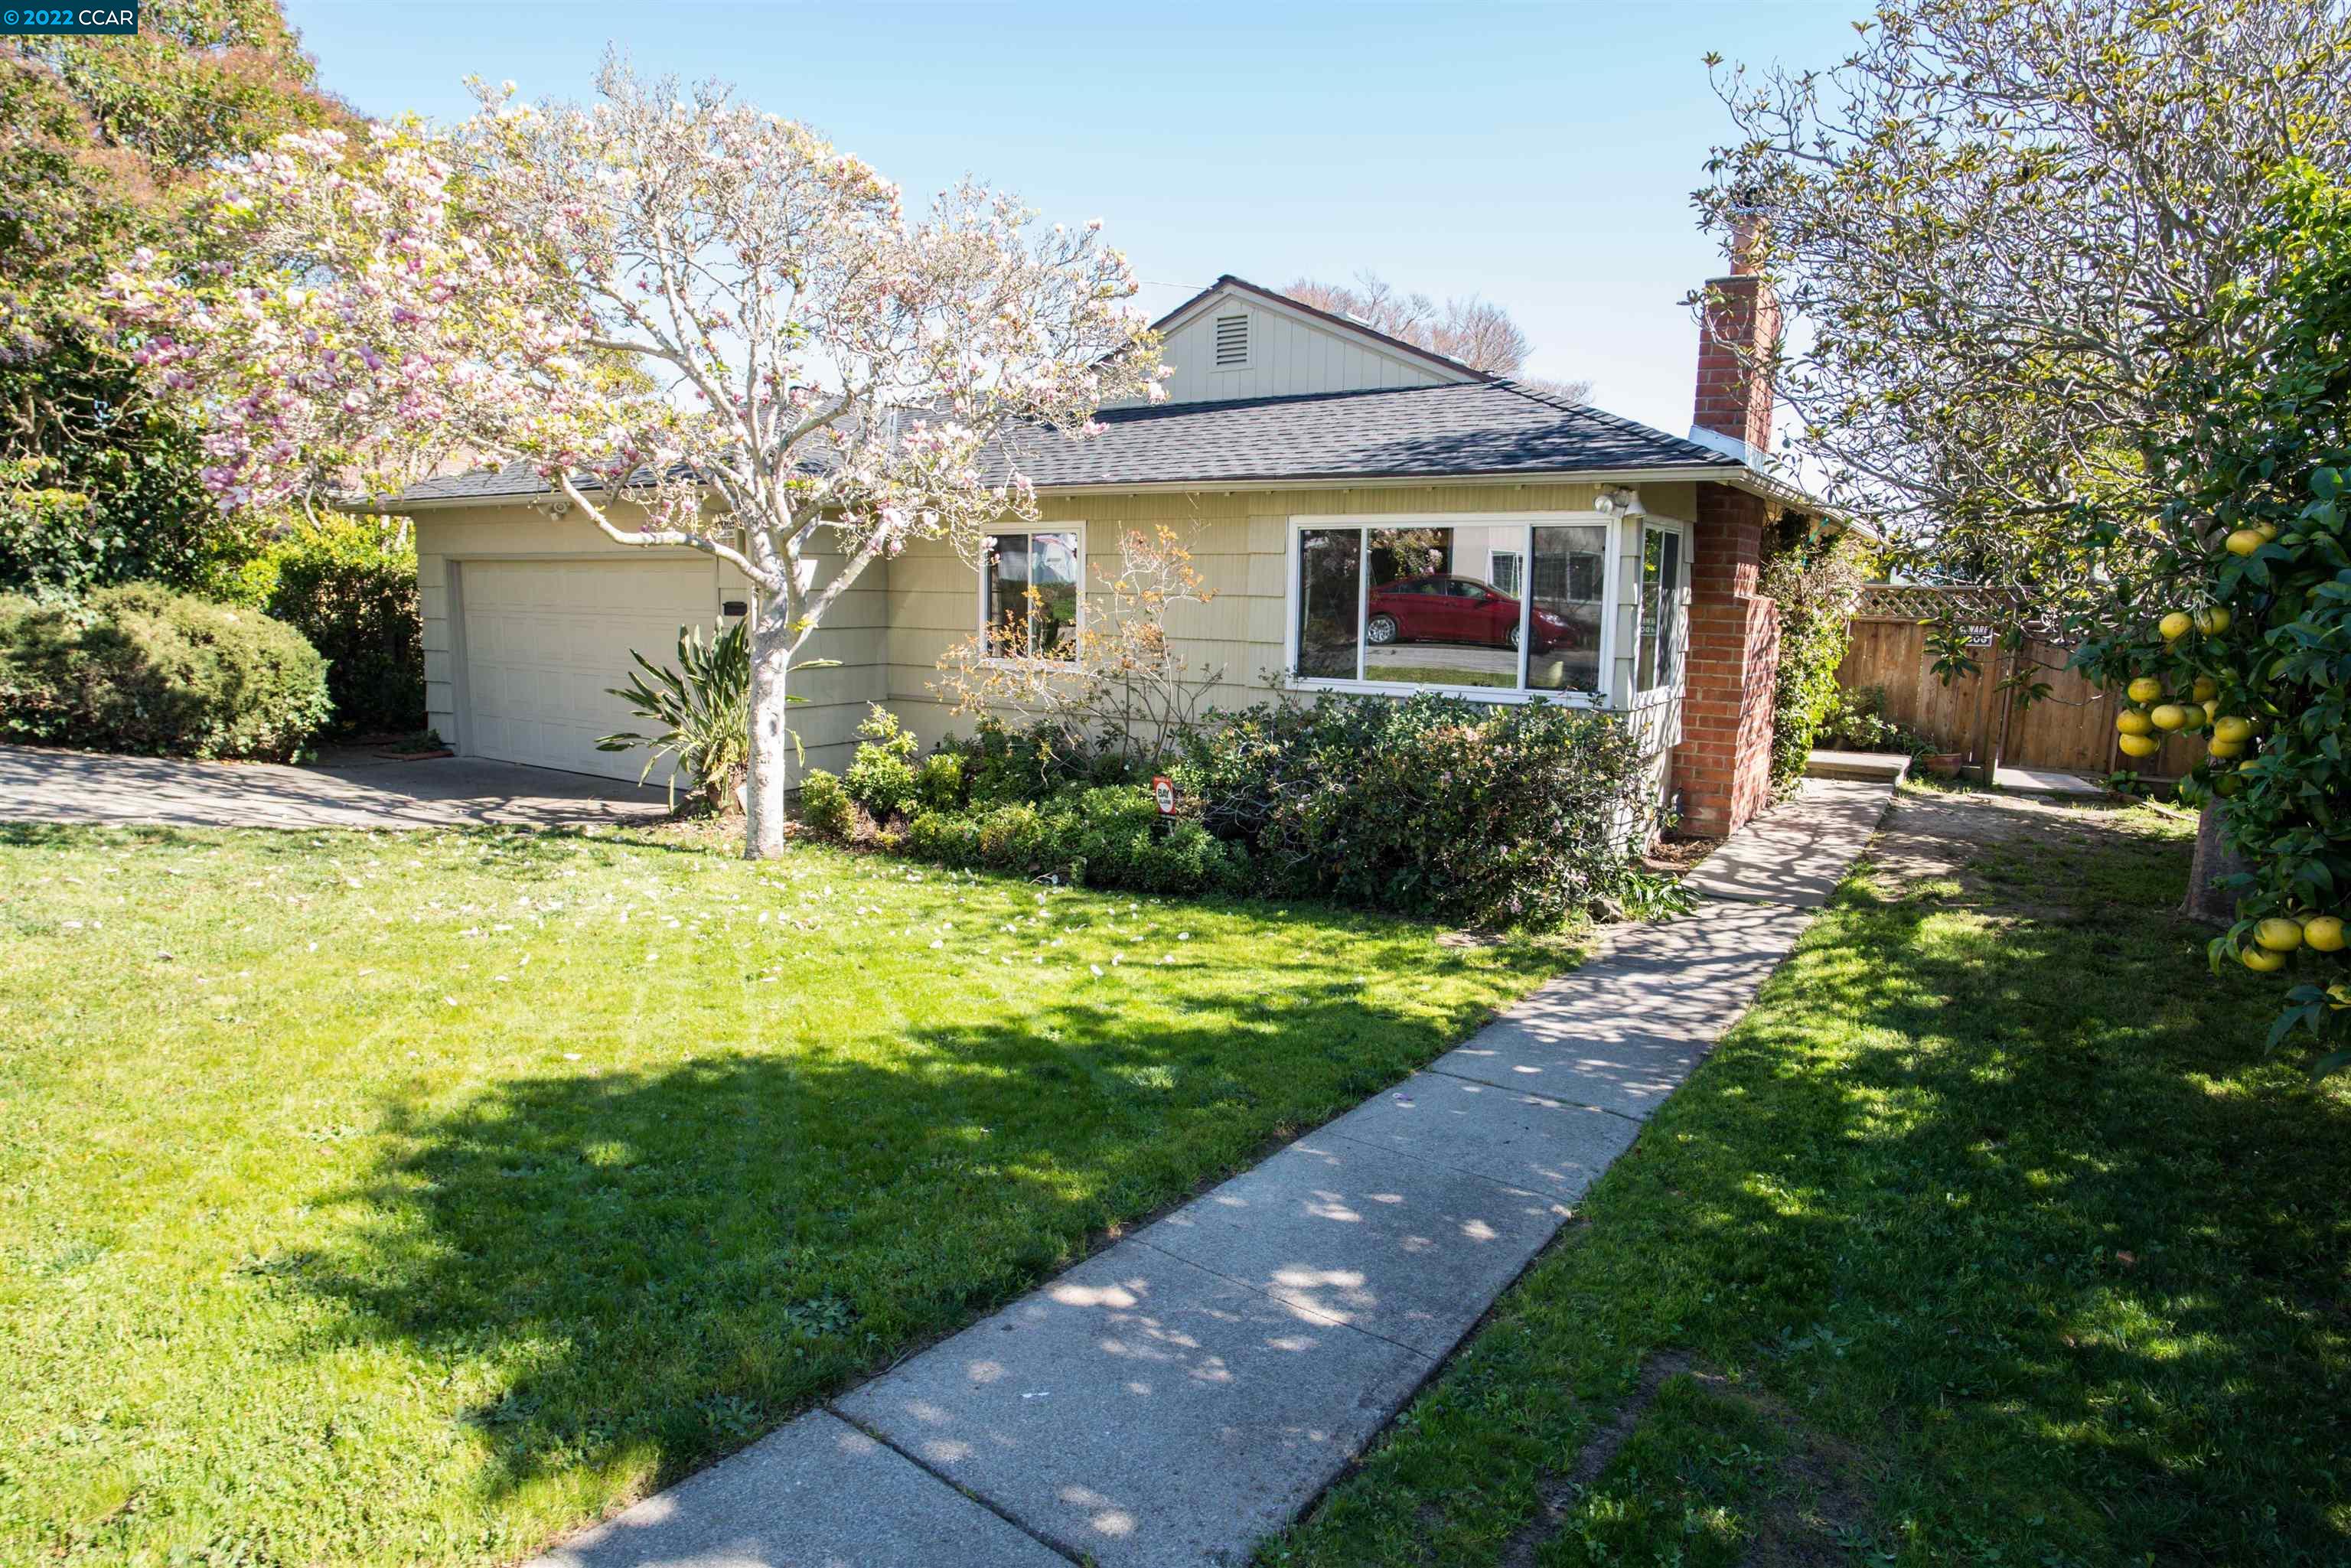 Photo of 3012 Stephen Dr in Richmond, CA